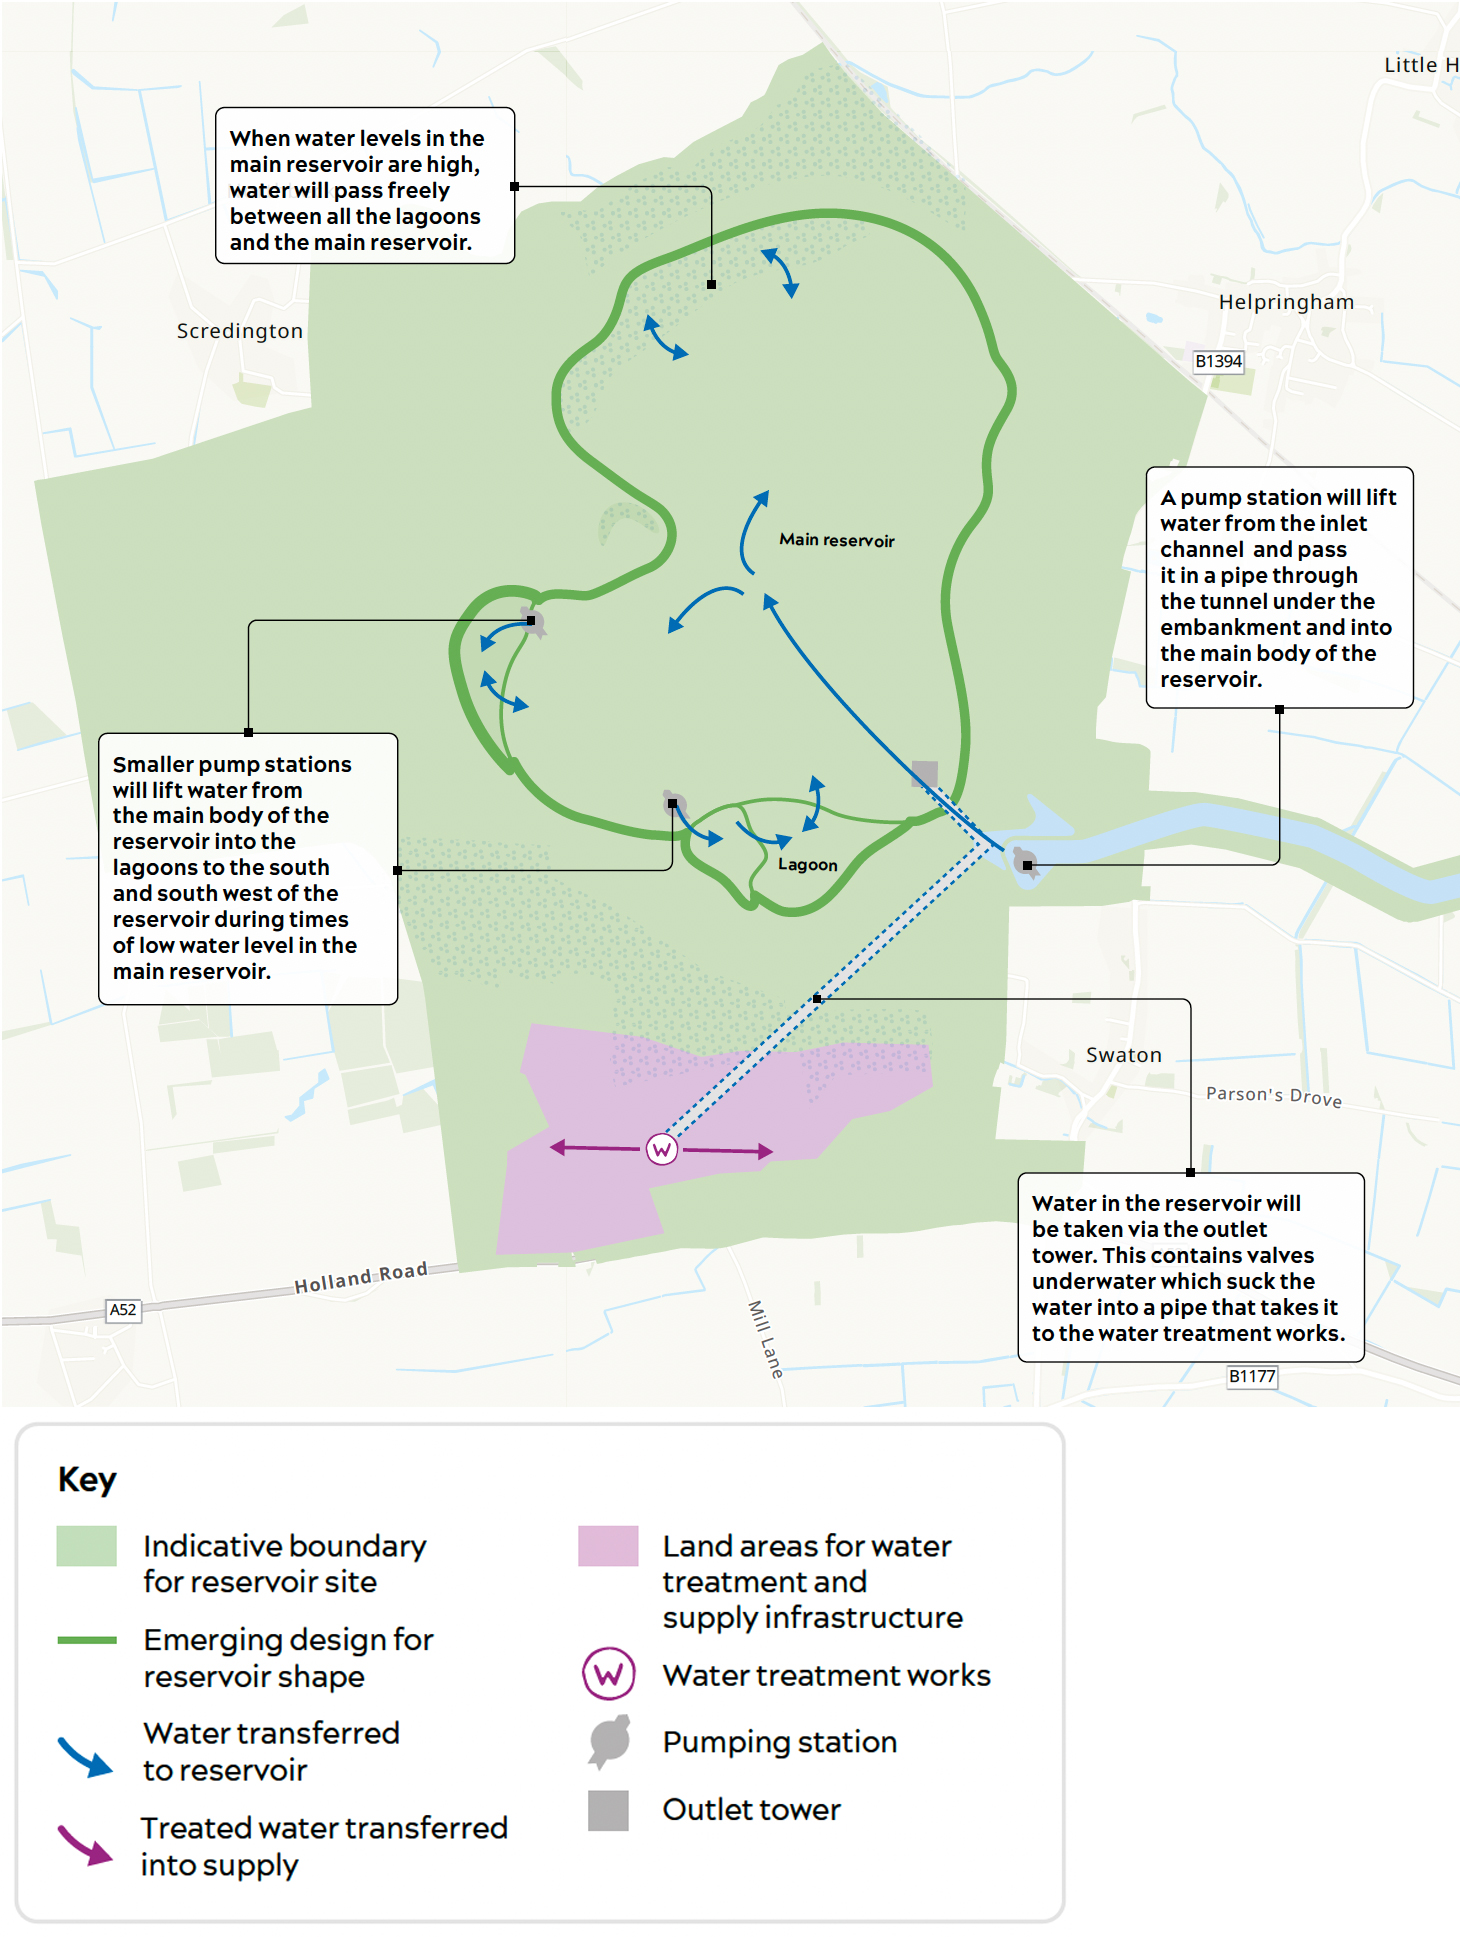 Illustration showing how the reservoir would likely operate, based on our emerging design